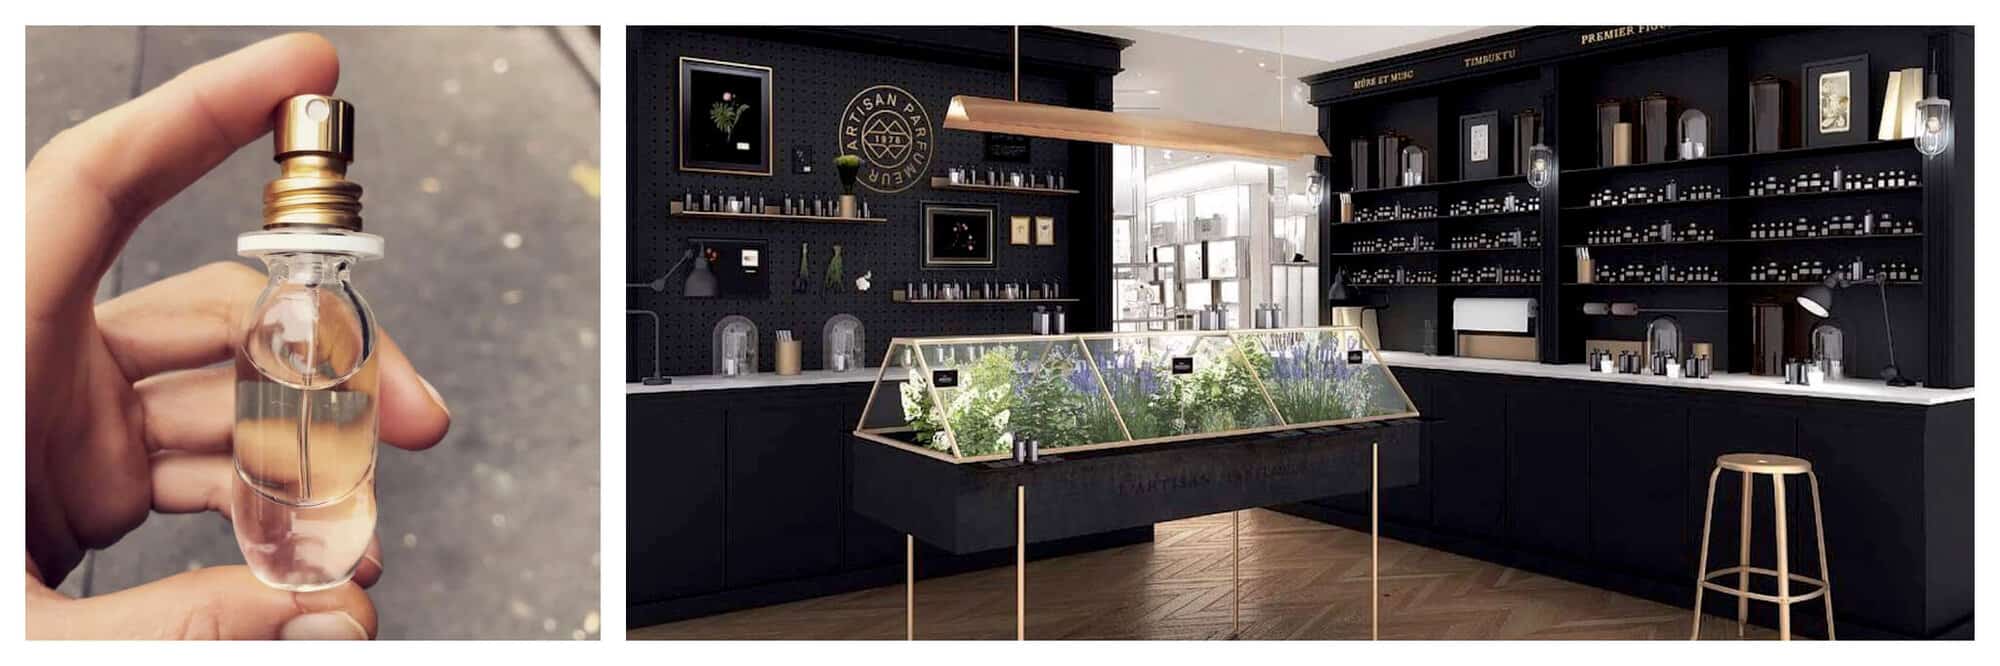 Left: a hand holding a small, clear bottle of perfume with a gold top. Right: interior of a perfume shop. The walls are black and the display cases have gold details. There is a glass case with green, white, and purple flowers.  